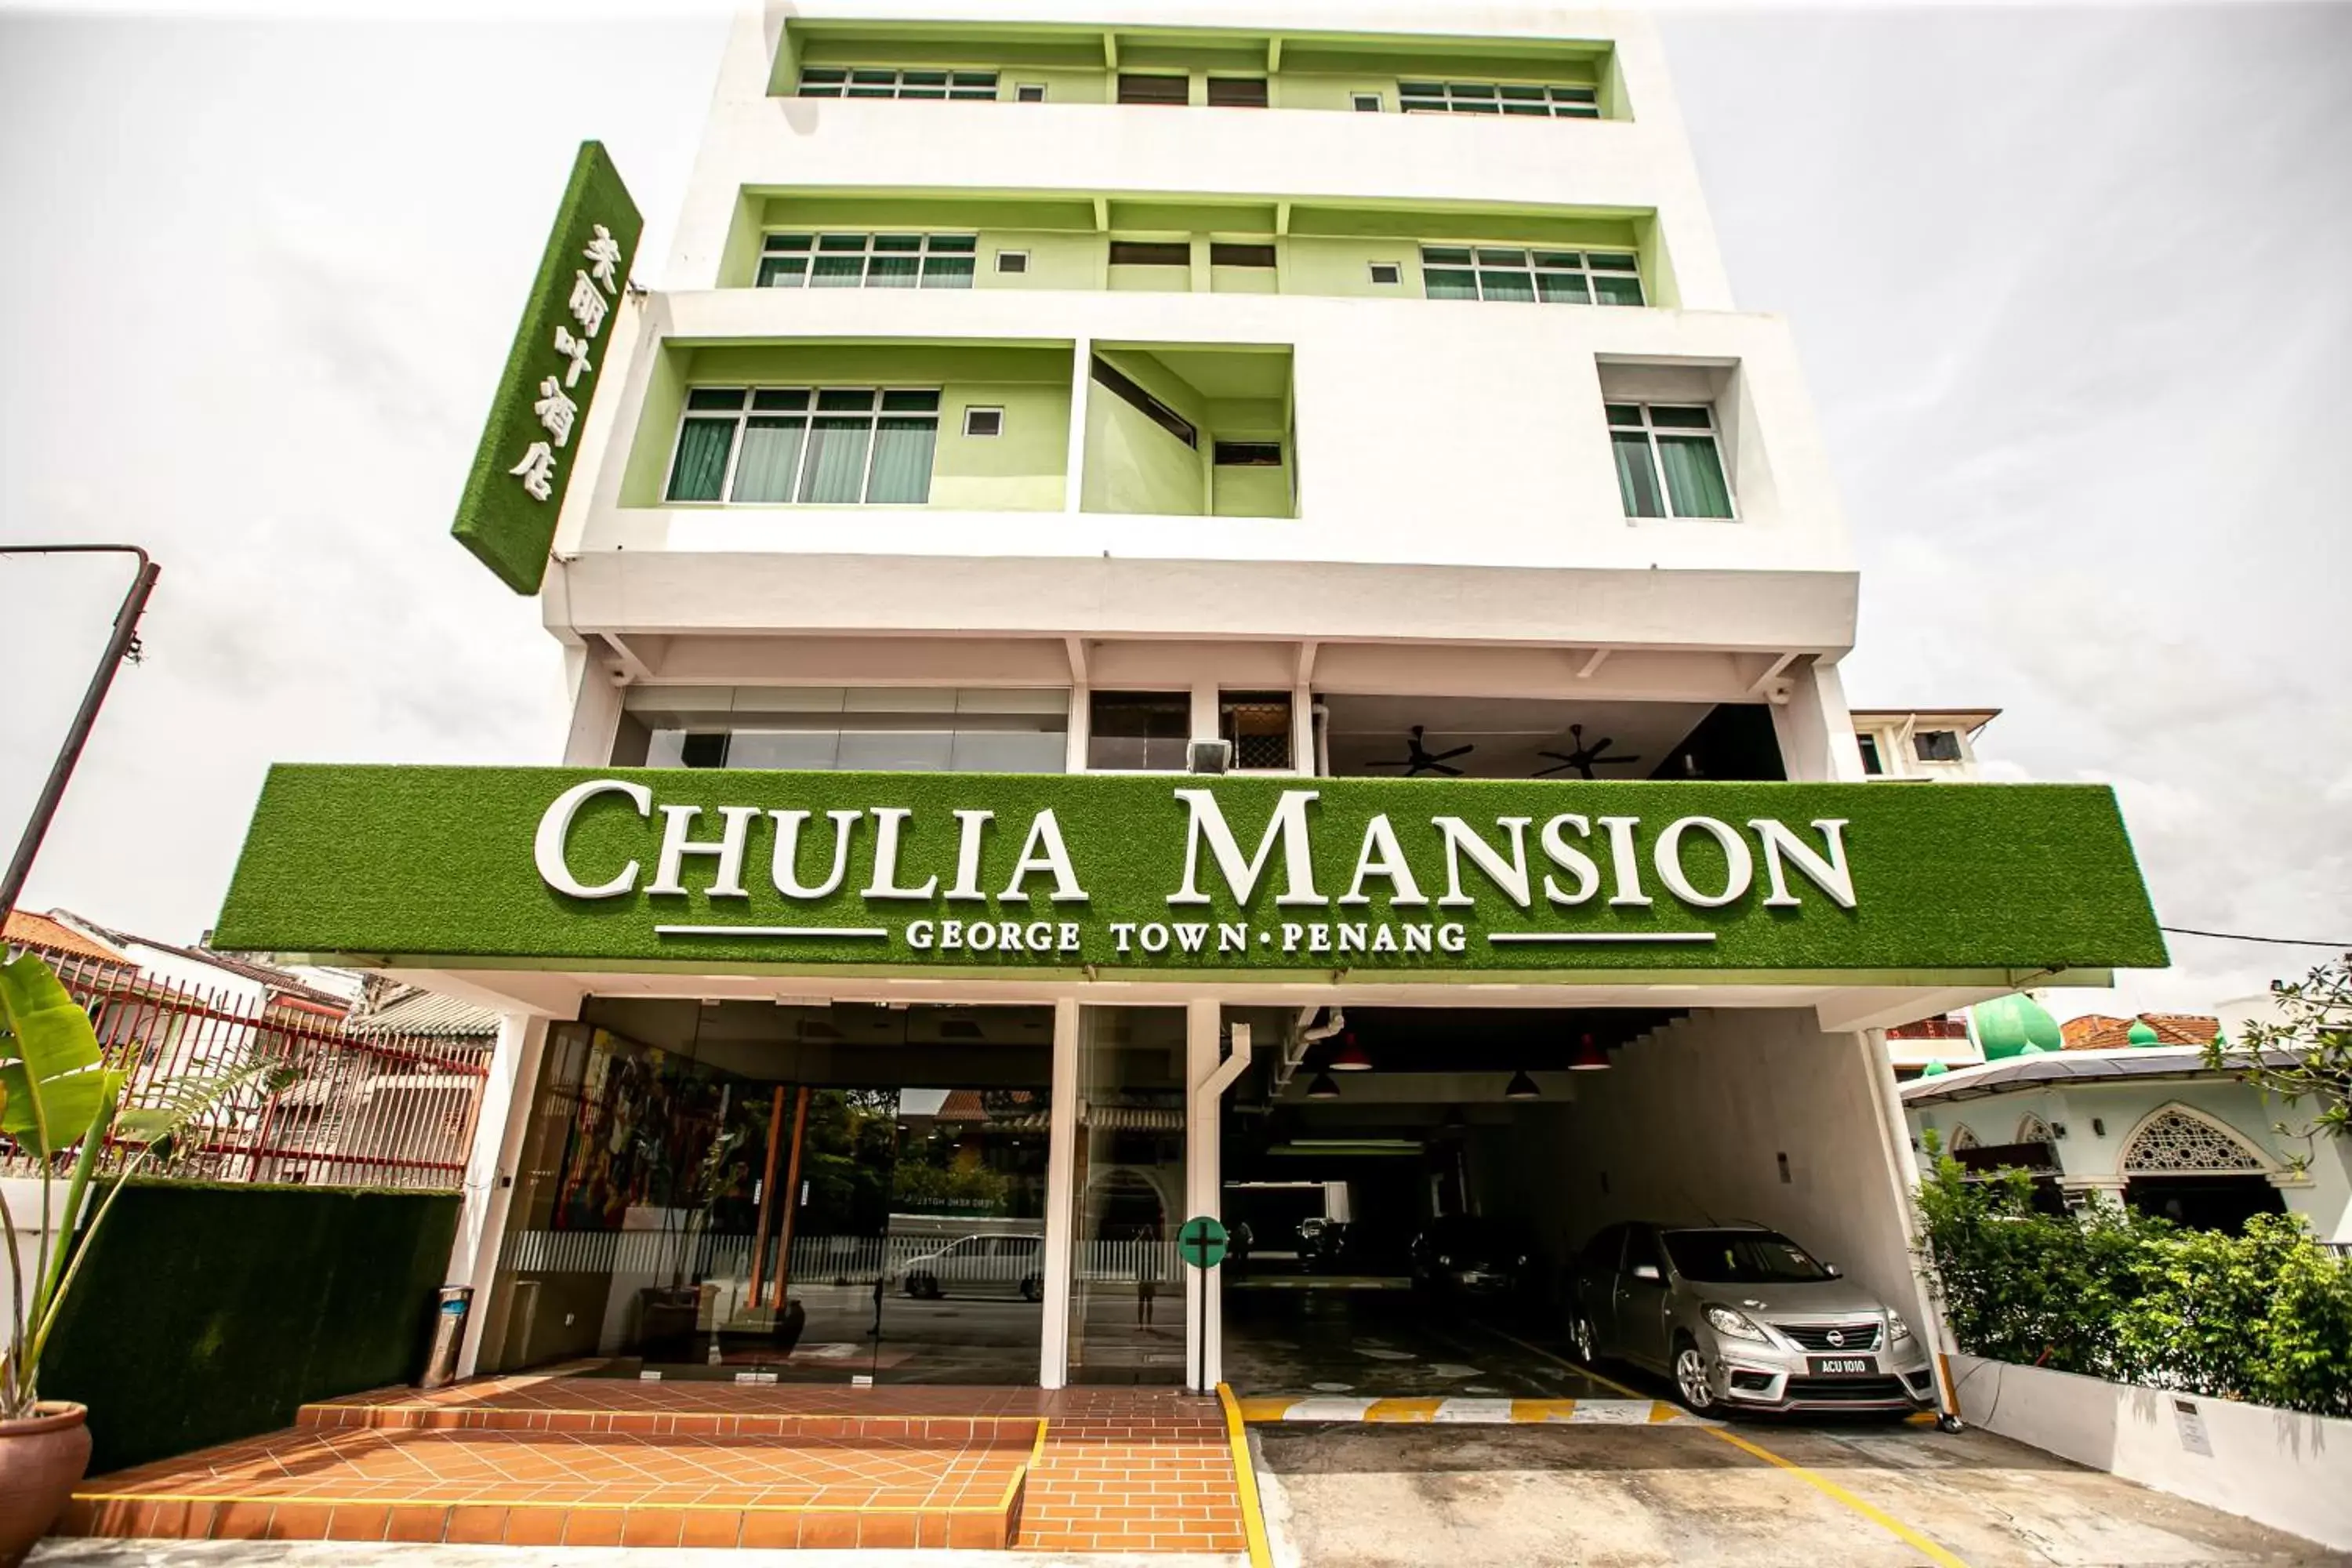 Property Building in Chulia Mansion